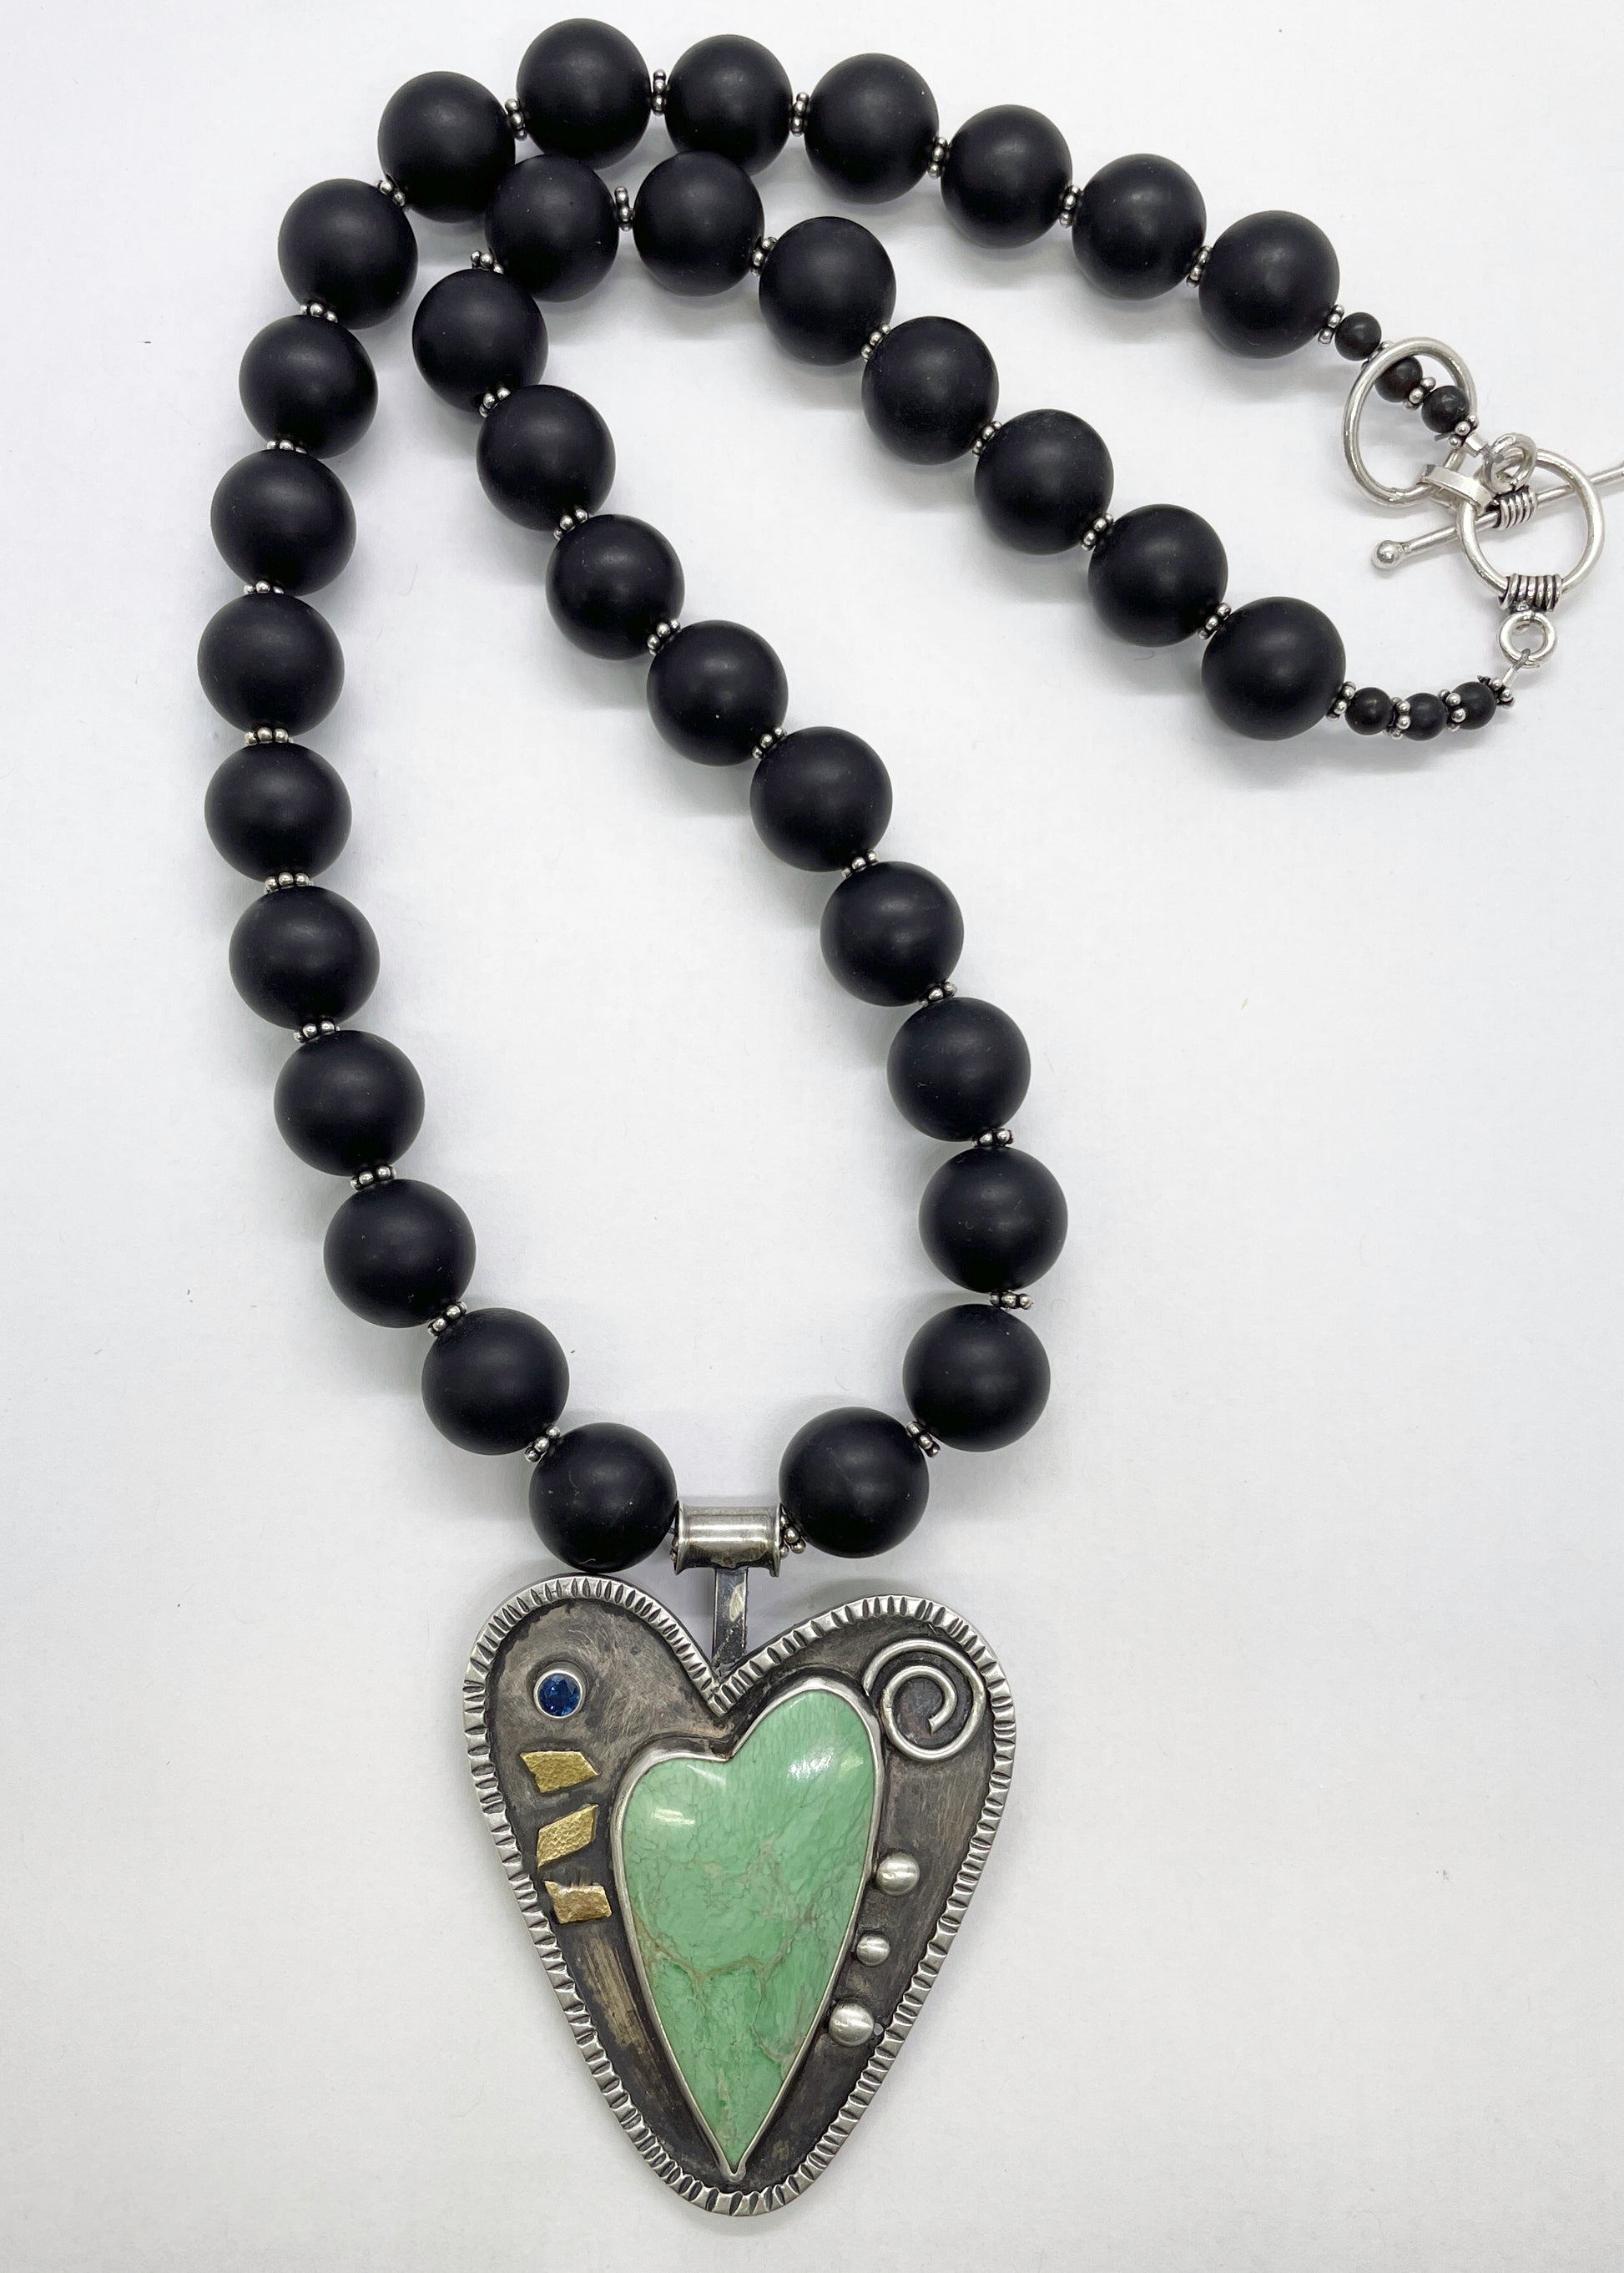 Heart Shaped Pendant with Variscite and Matte Black Onyx Necklace - Sable Design